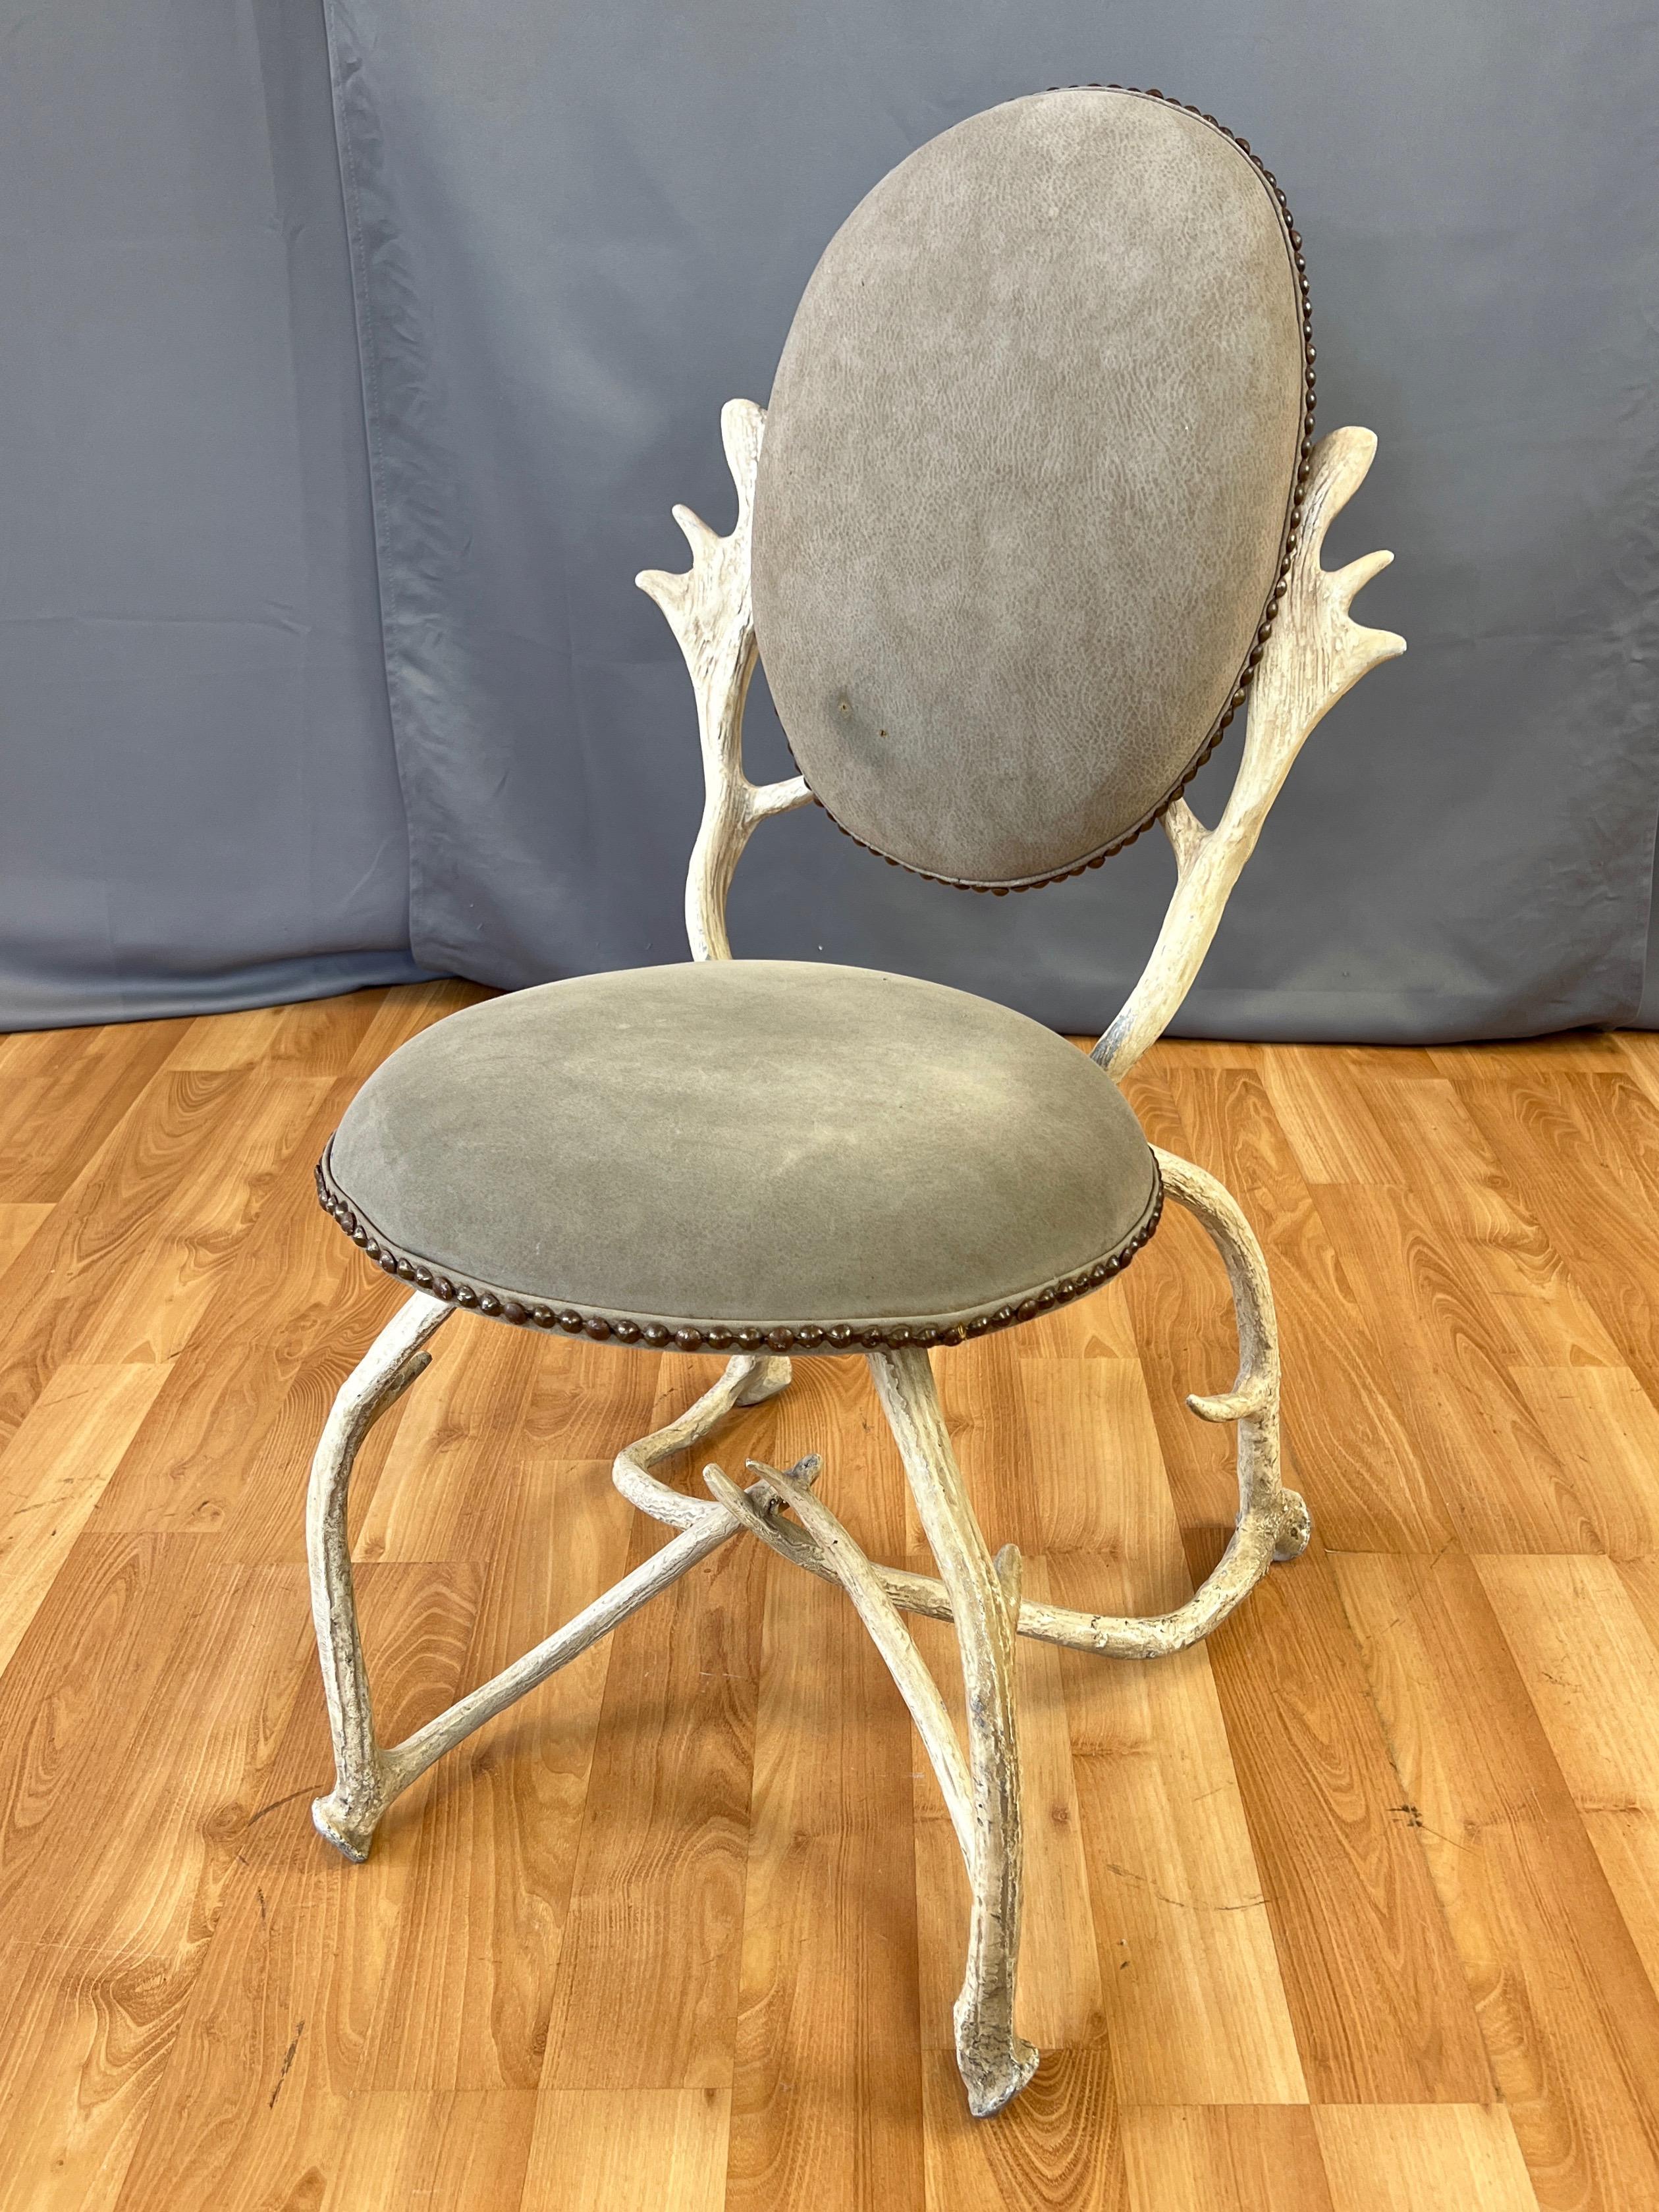 An uncommon 1970s faux-antler side chair with faux-leather suede upholstery by Arthur Court for Arthur Court Designs.

Part of San Francisco-based designer Court’s (b. 1928–2015) signature line of sand-cast aluminum antler motif furniture, which